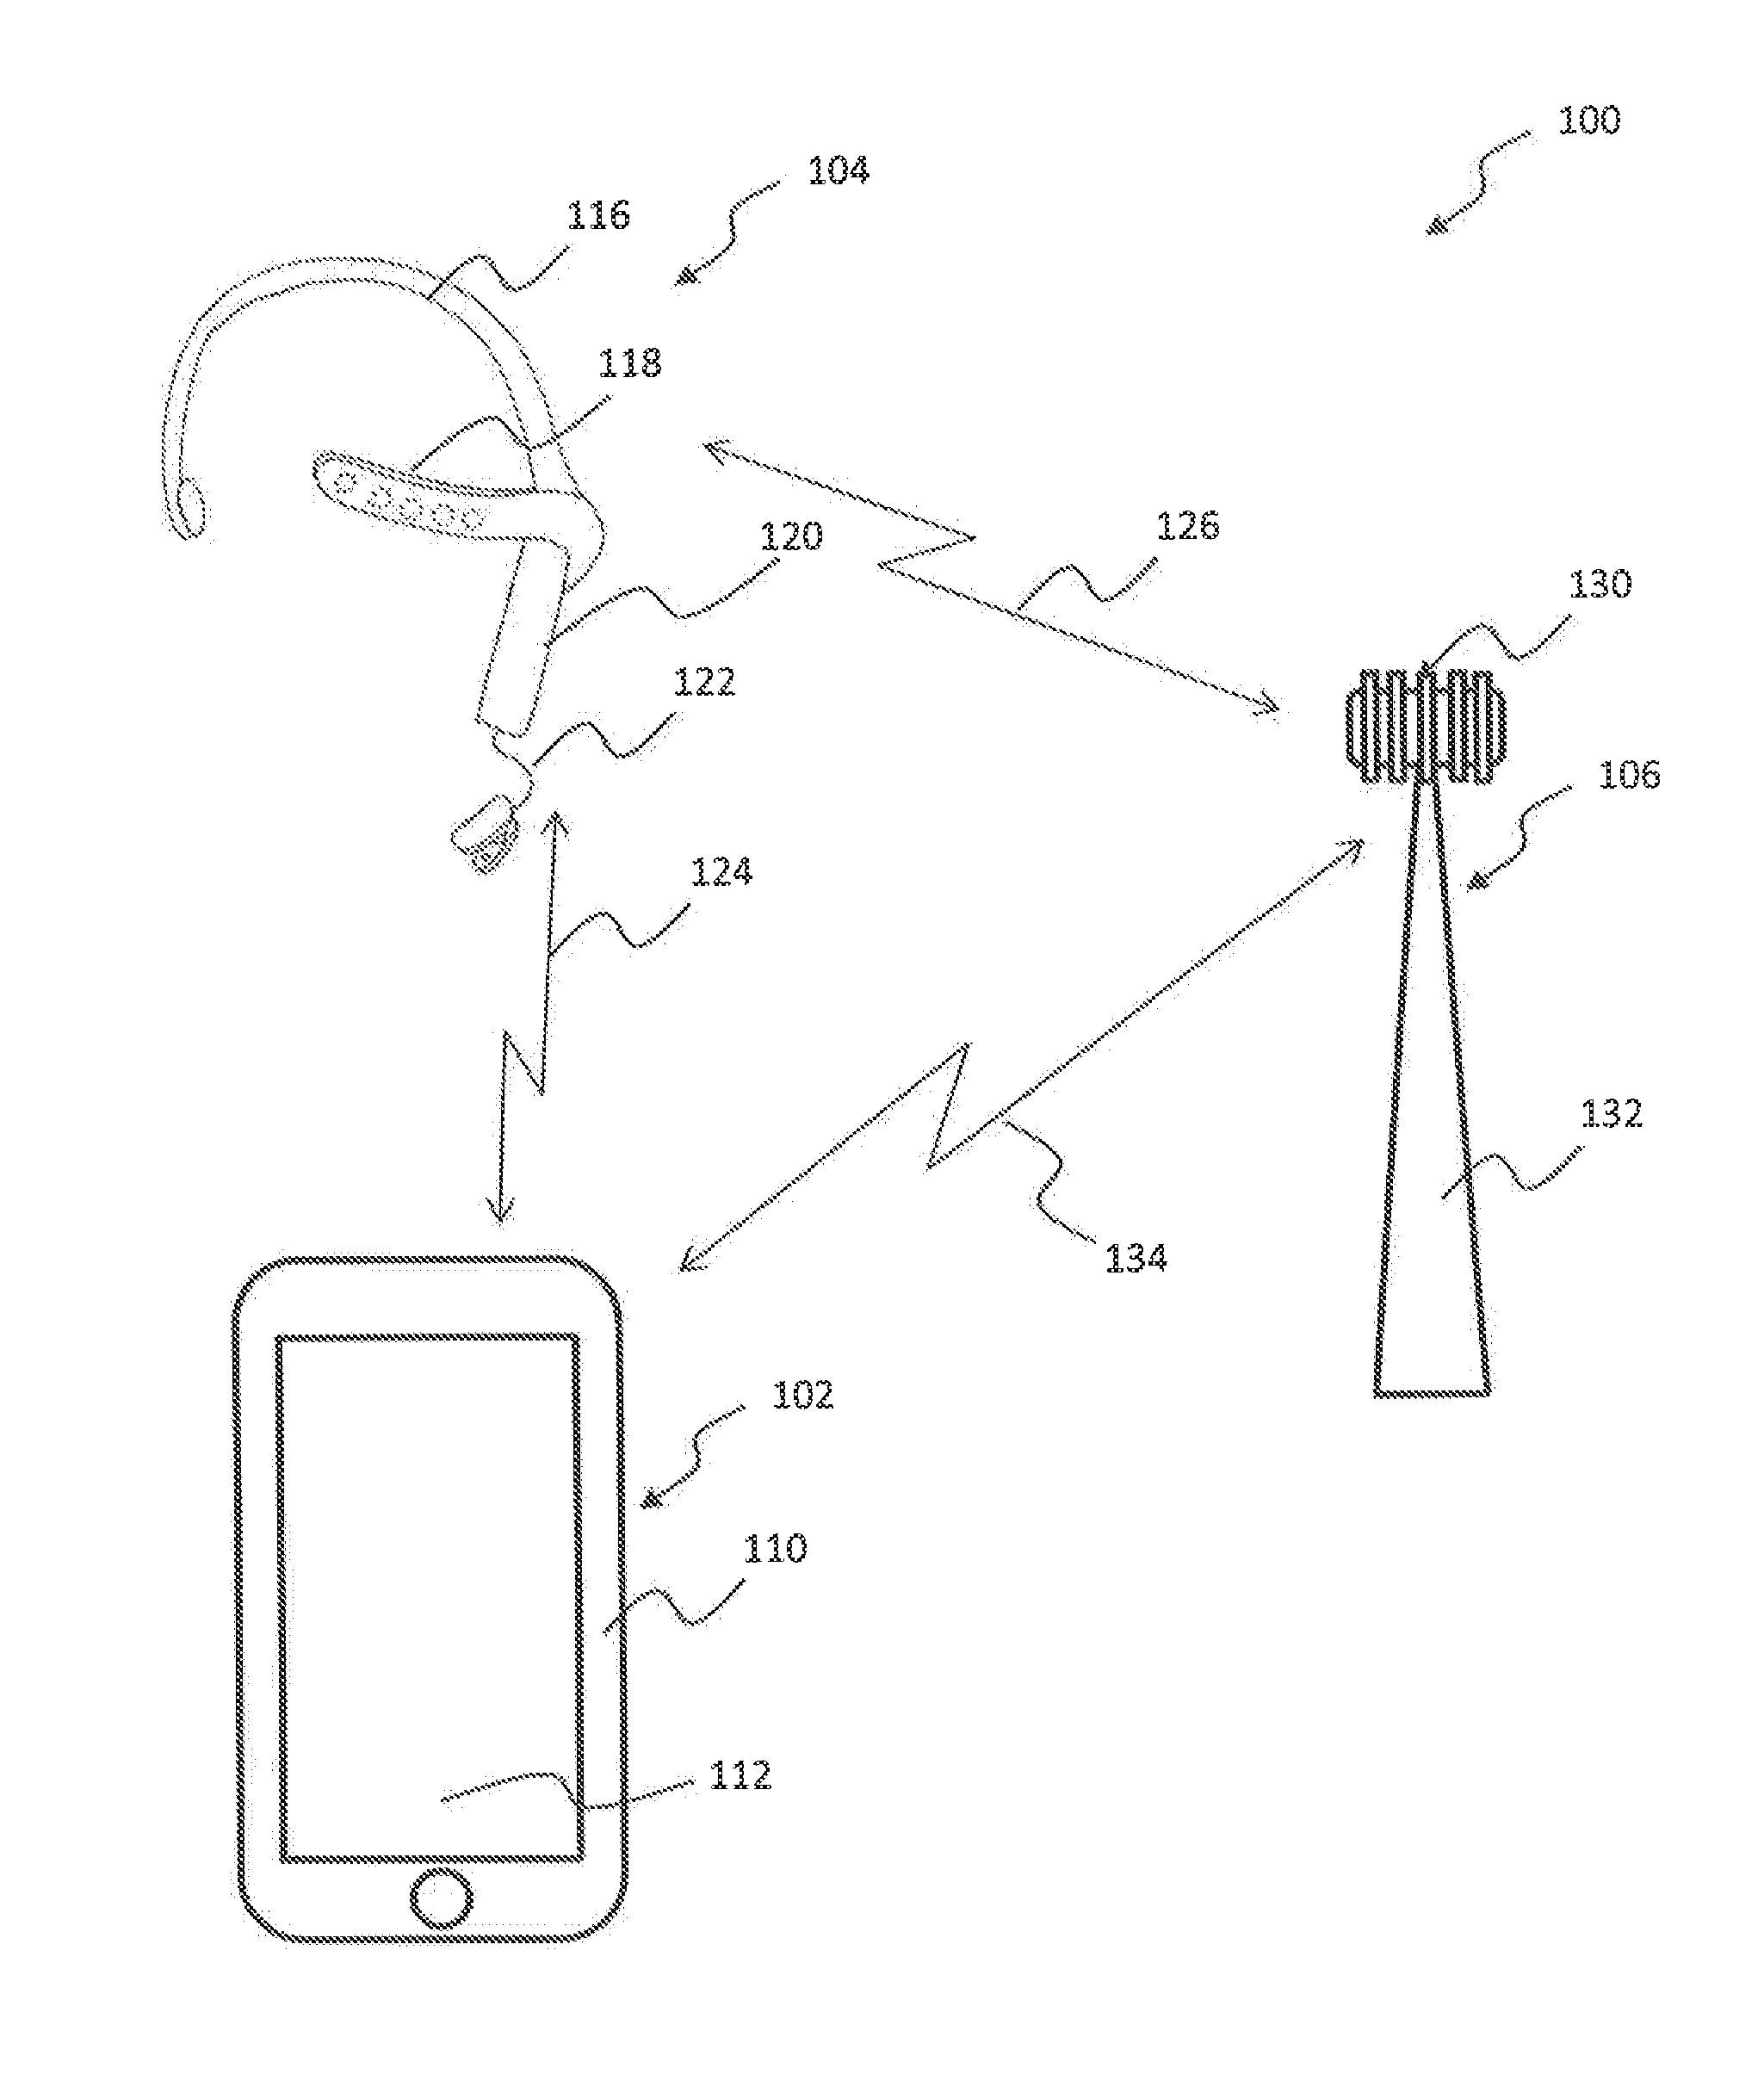 Communication system having automated filtering based on mental state decisions